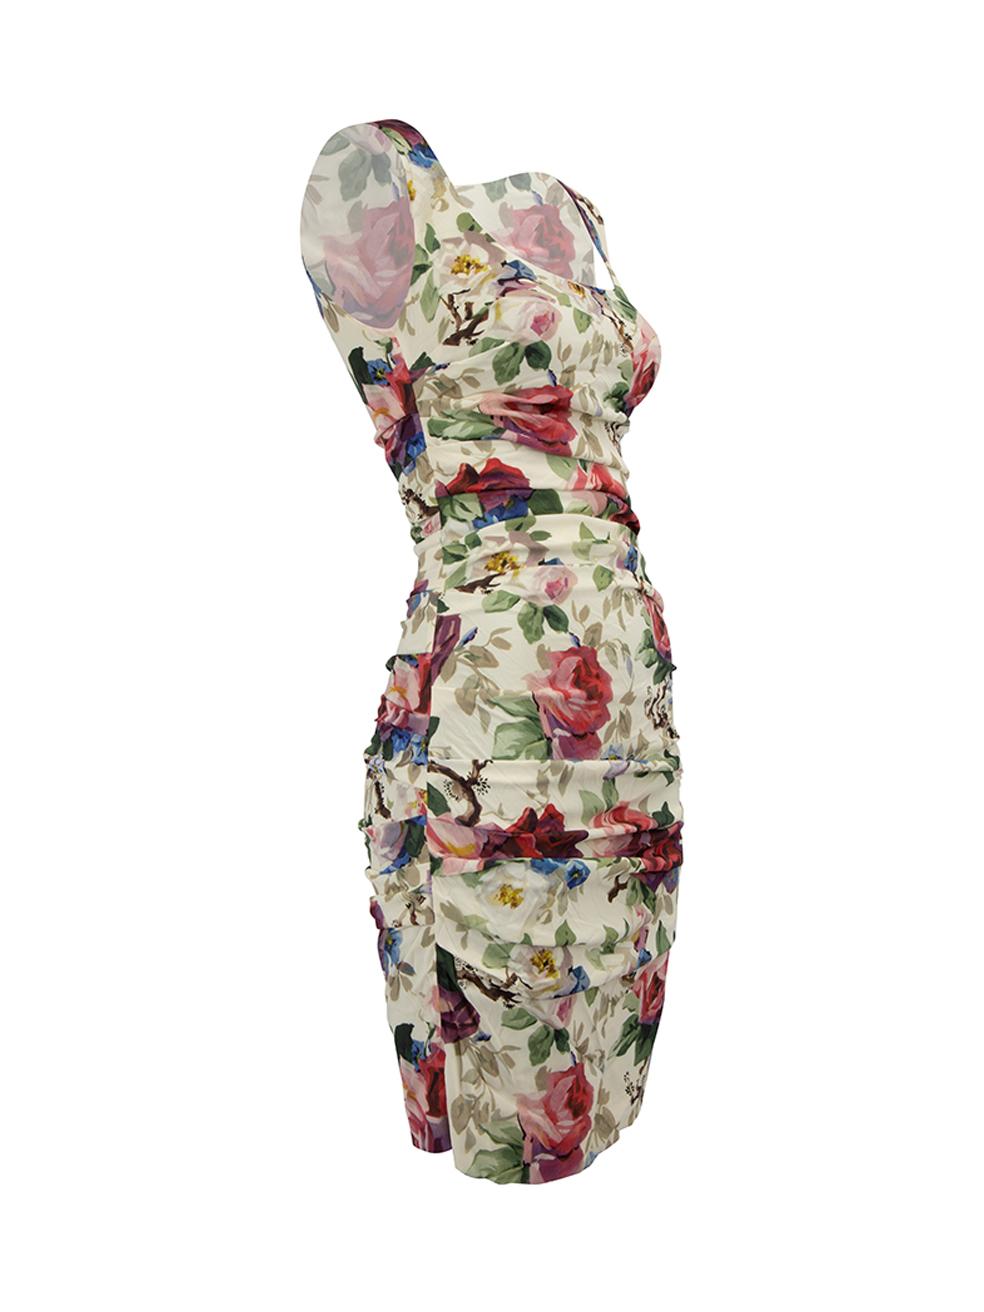 CONDITION is Very good. Hardly any visible wear to dress is evident on this used Dolce & Gabbana designer resale item. Details Multicolour Silk Mini dress Floral print pattern Scoop neckline Ruched design Back zip closure with hook and eye Made in